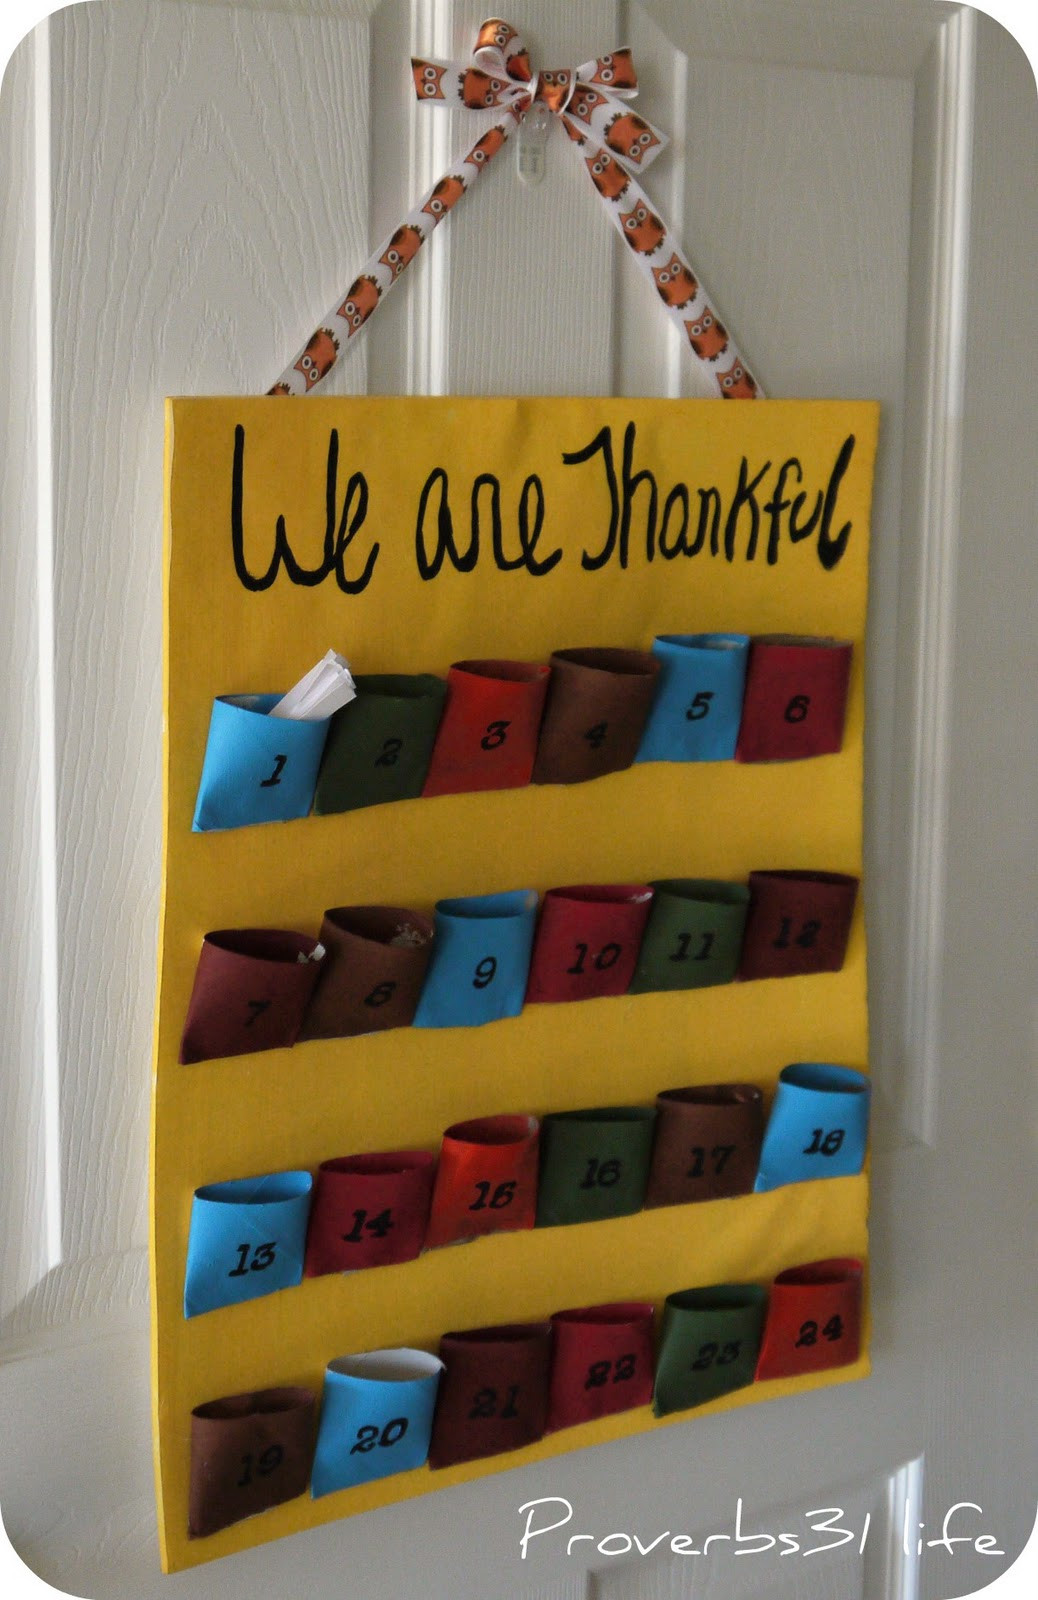 Toilet Paper Roll Thanksgiving Crafts
 Proverbs 31 Life Thankful for Toilet Paper